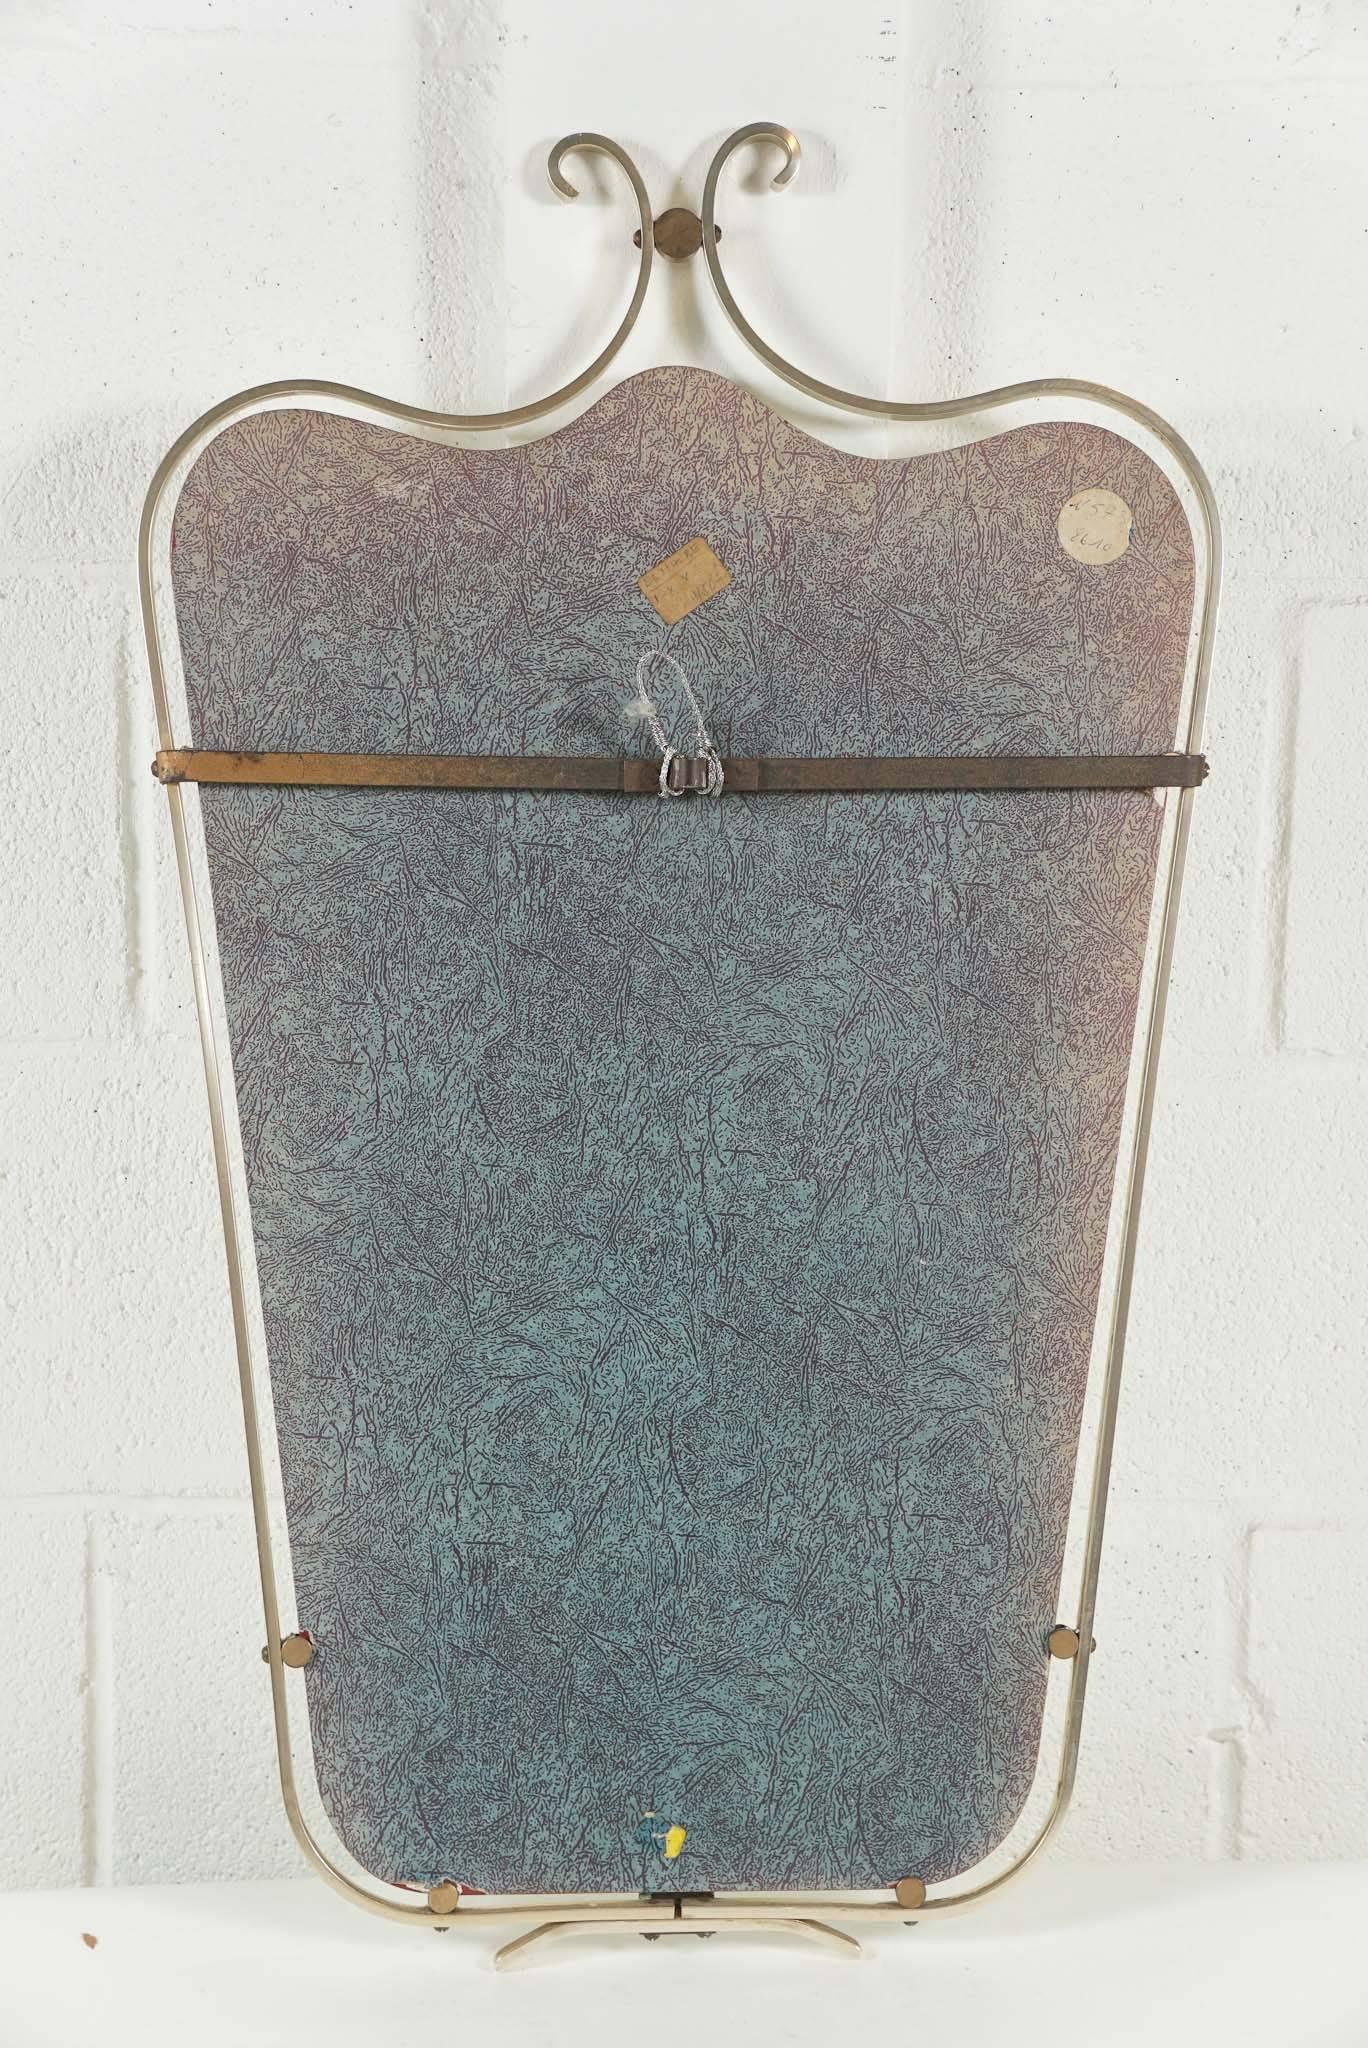 Petite French Mirror in Brass 3